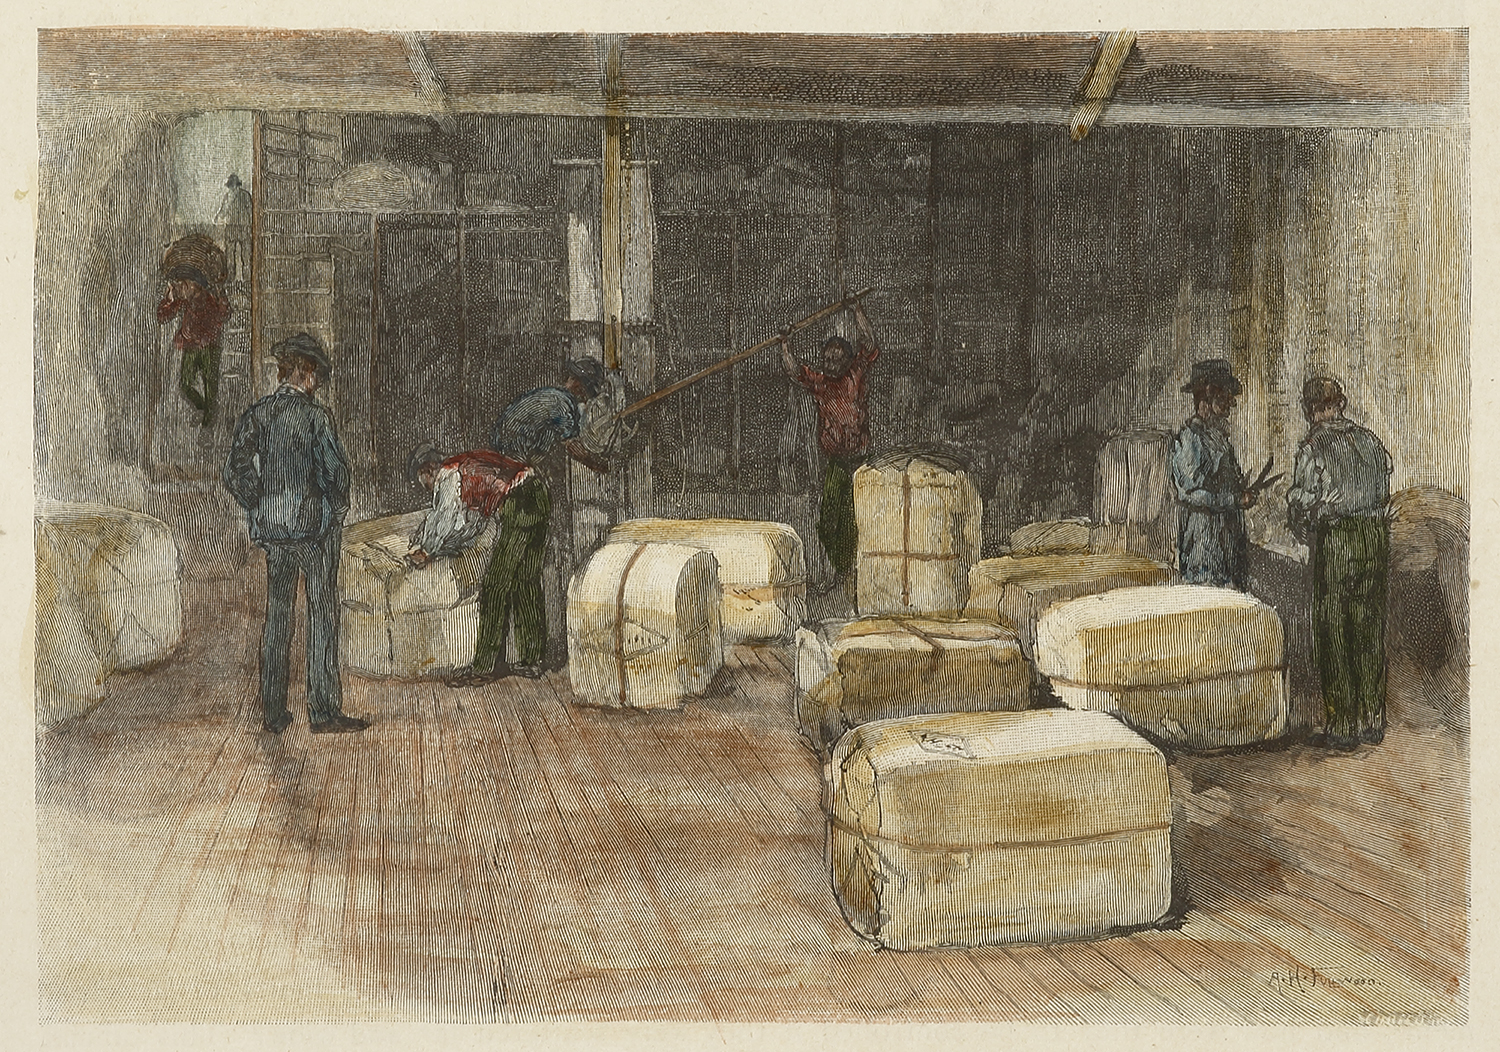 Wool Pressing. - Antique Print from 1886